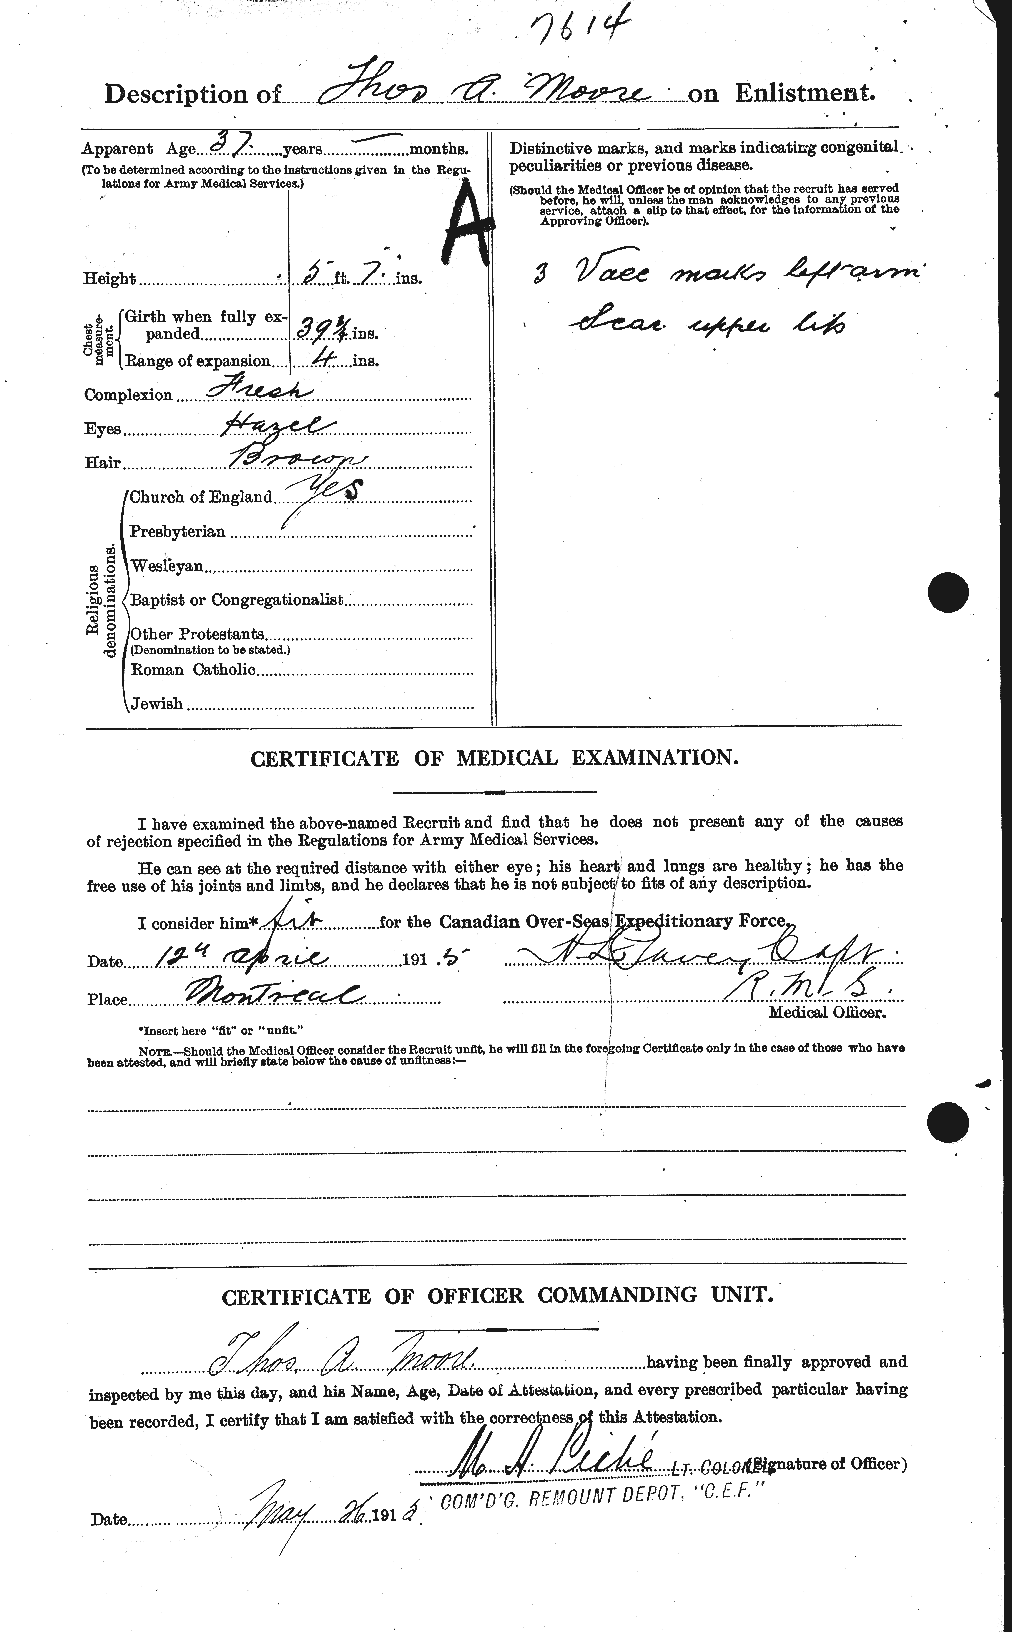 Personnel Records of the First World War - CEF 505637b